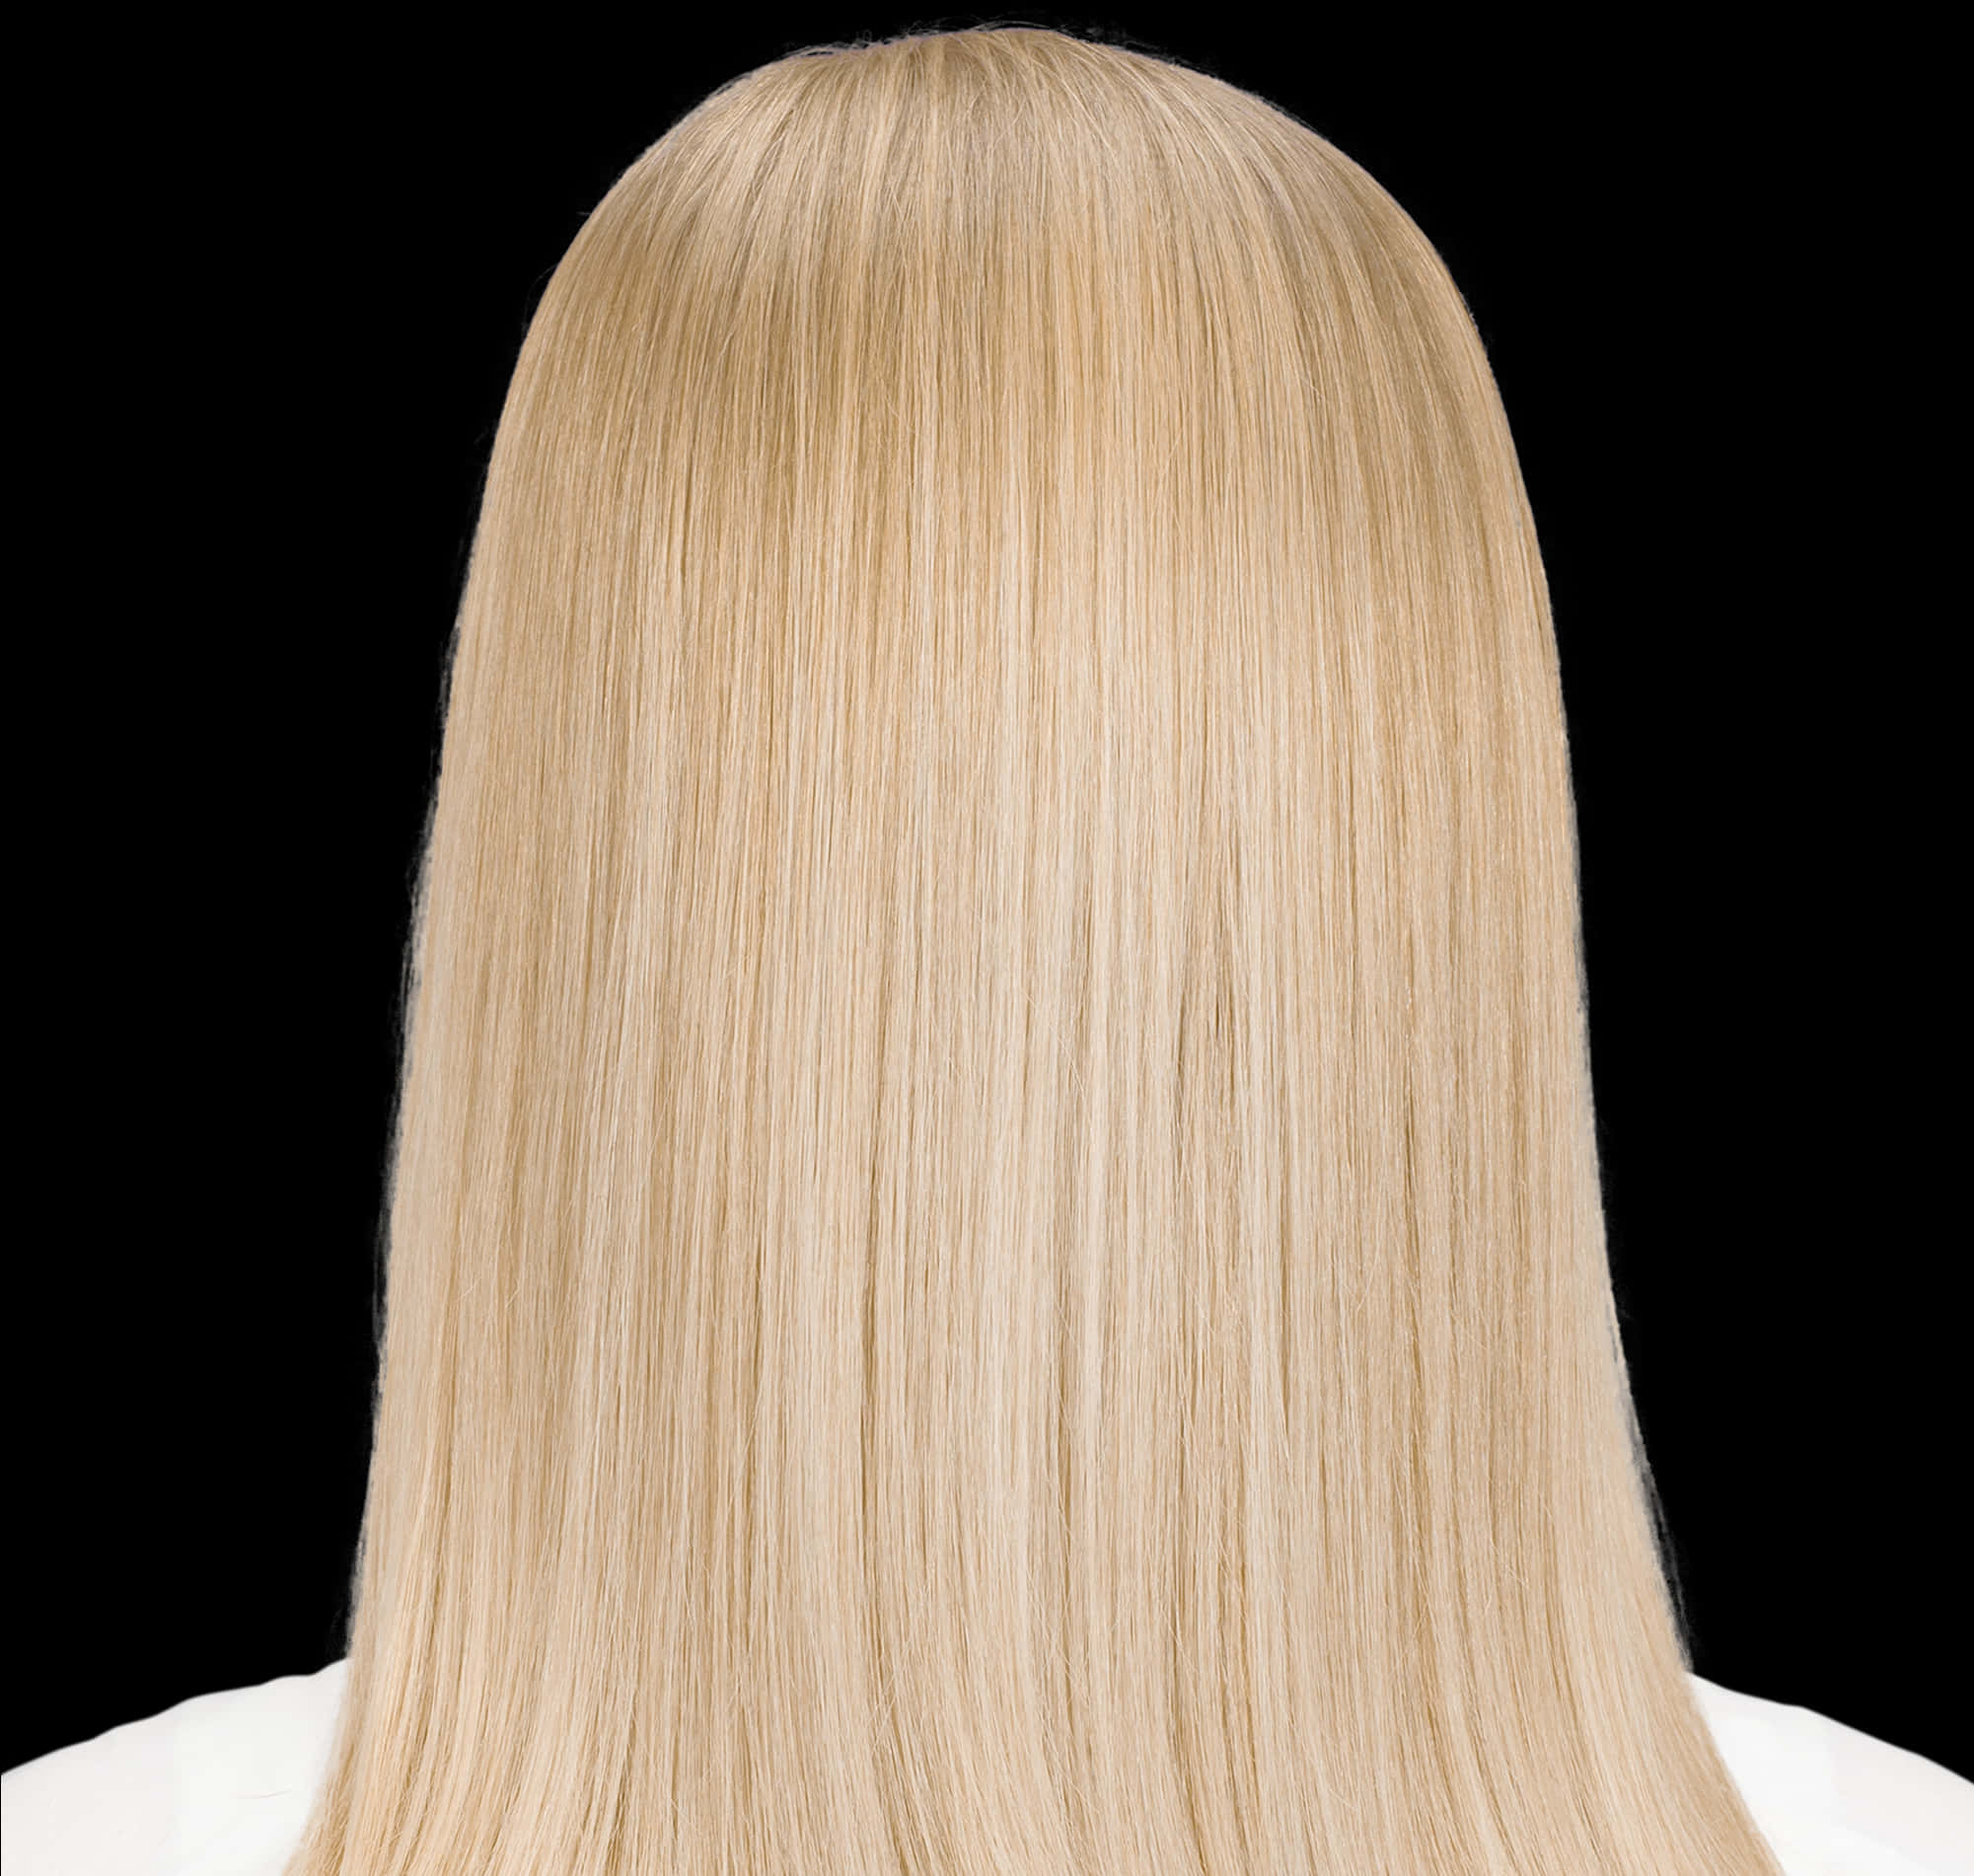 A Woman's Head With Blonde Hair